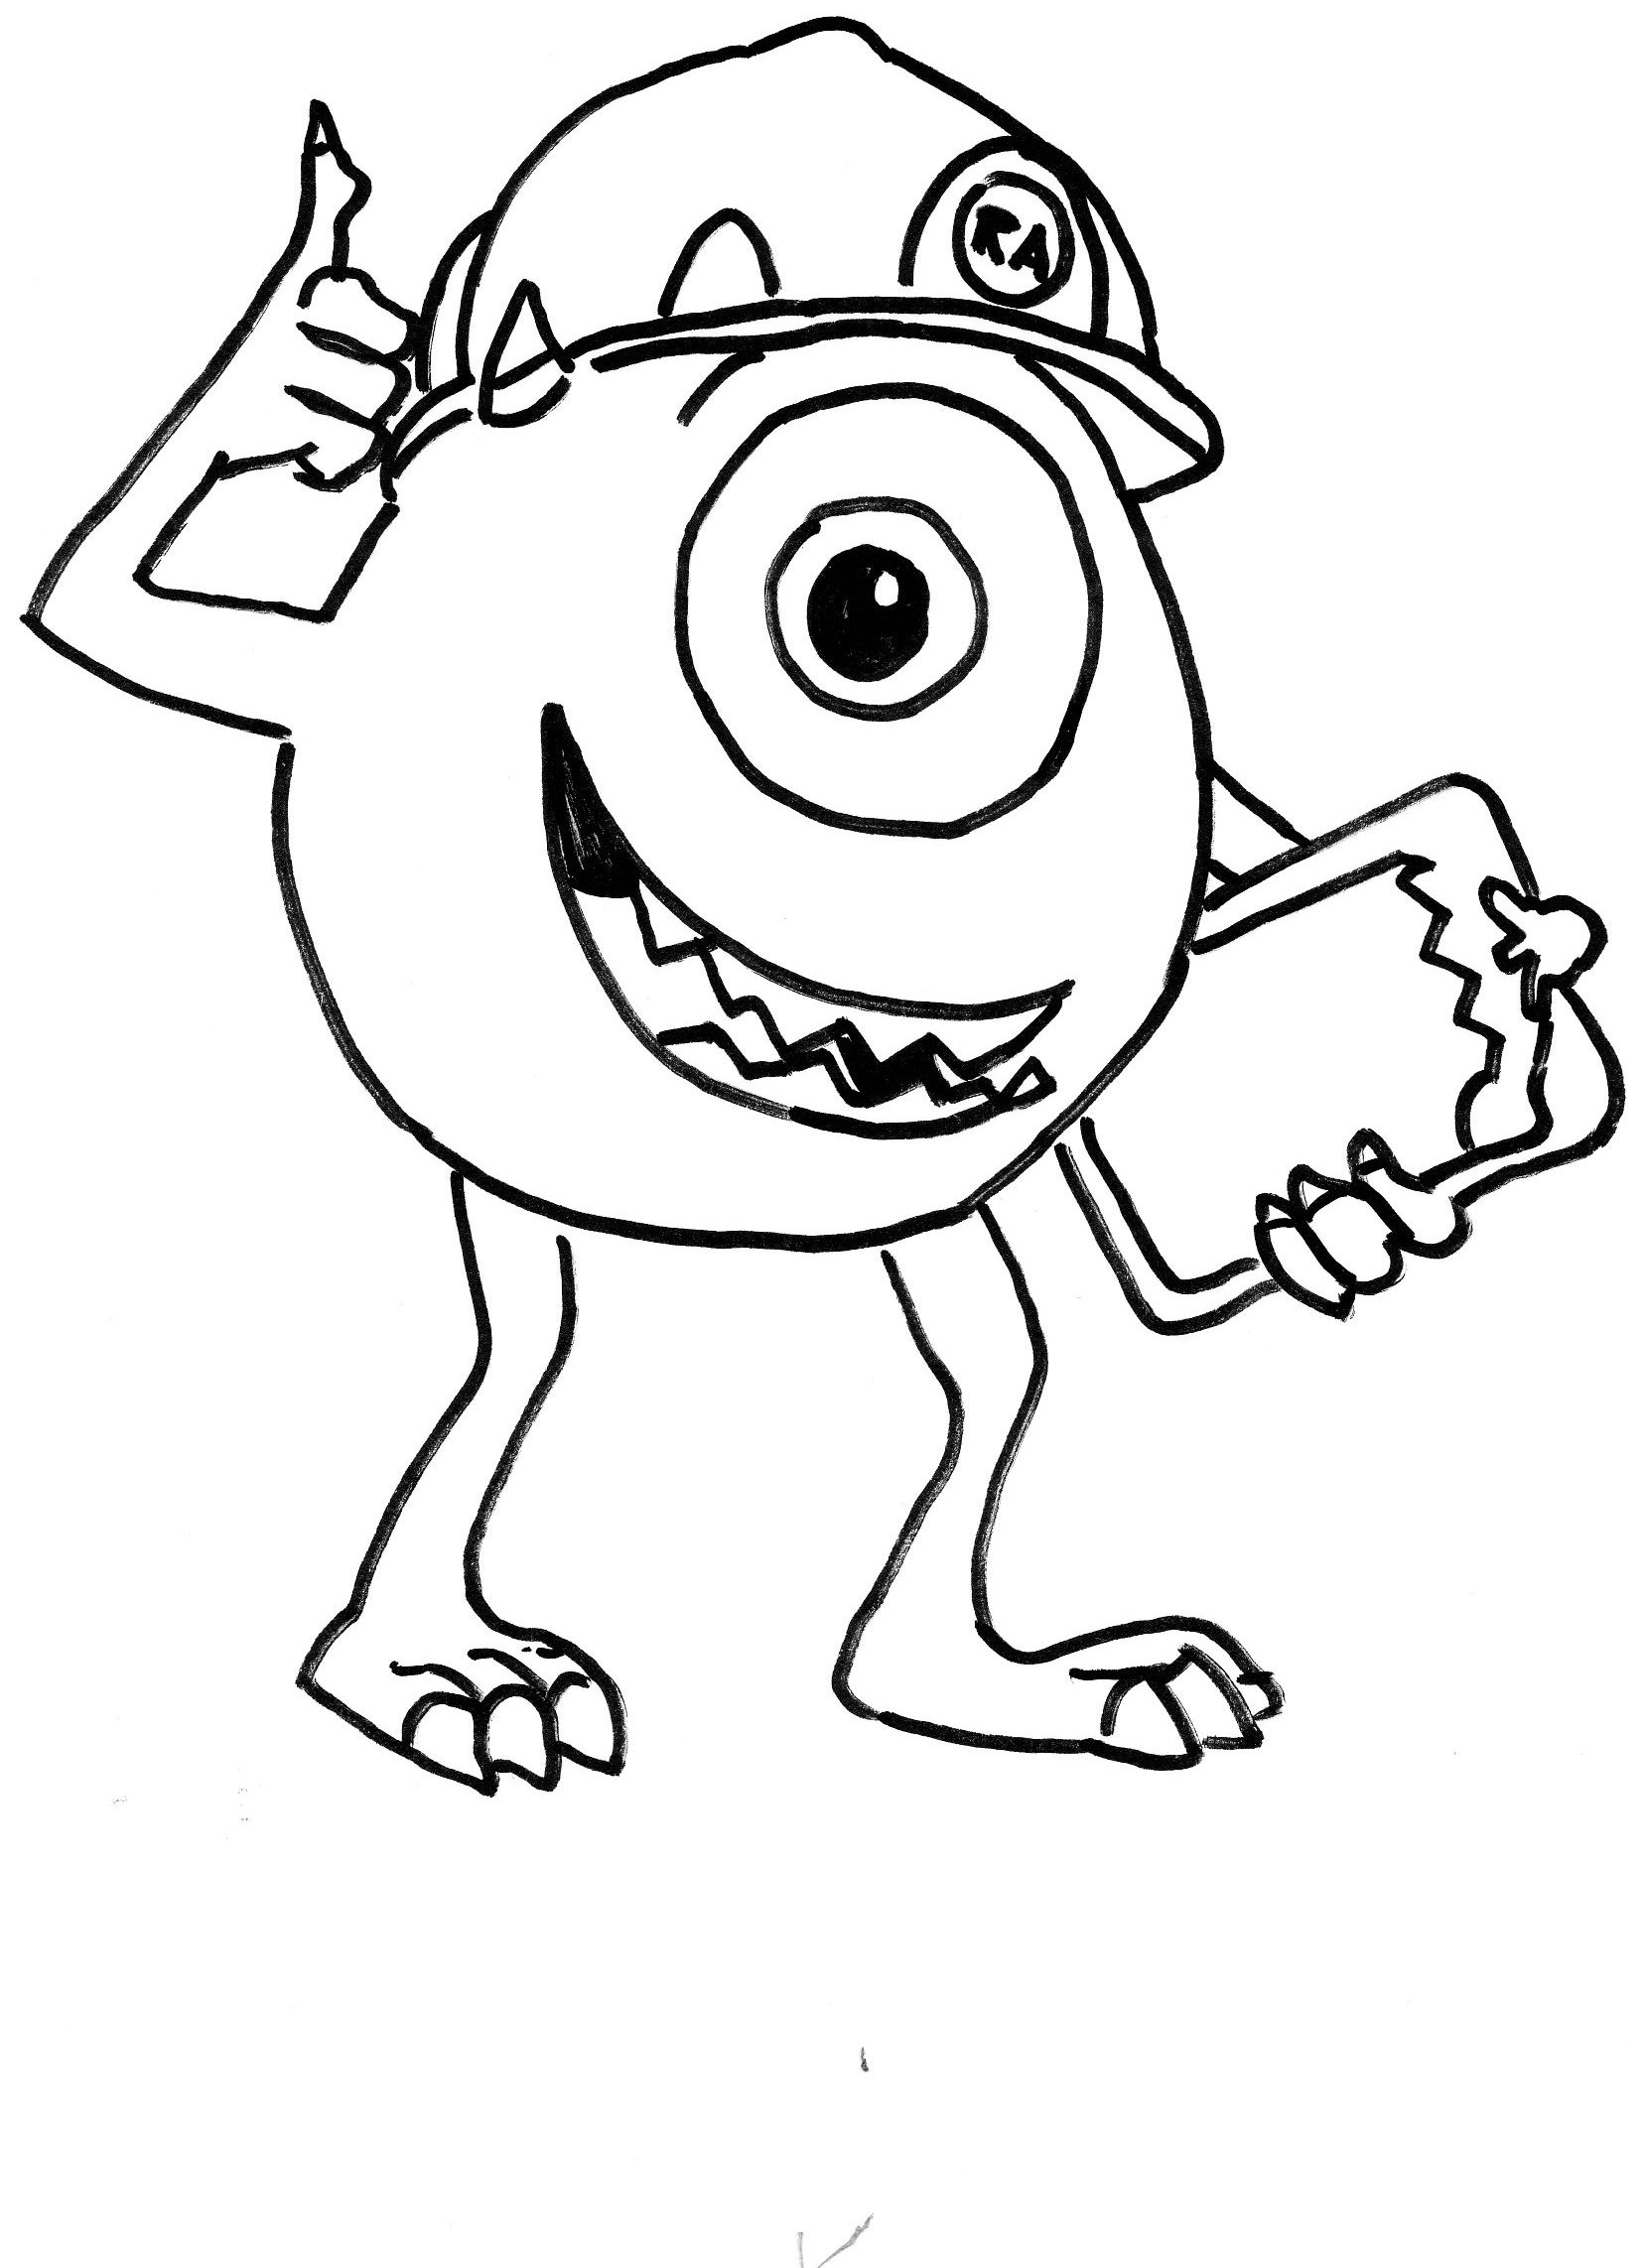 Coloring Sheets For Boys
 Boys Coloring Pages Bestofcoloring